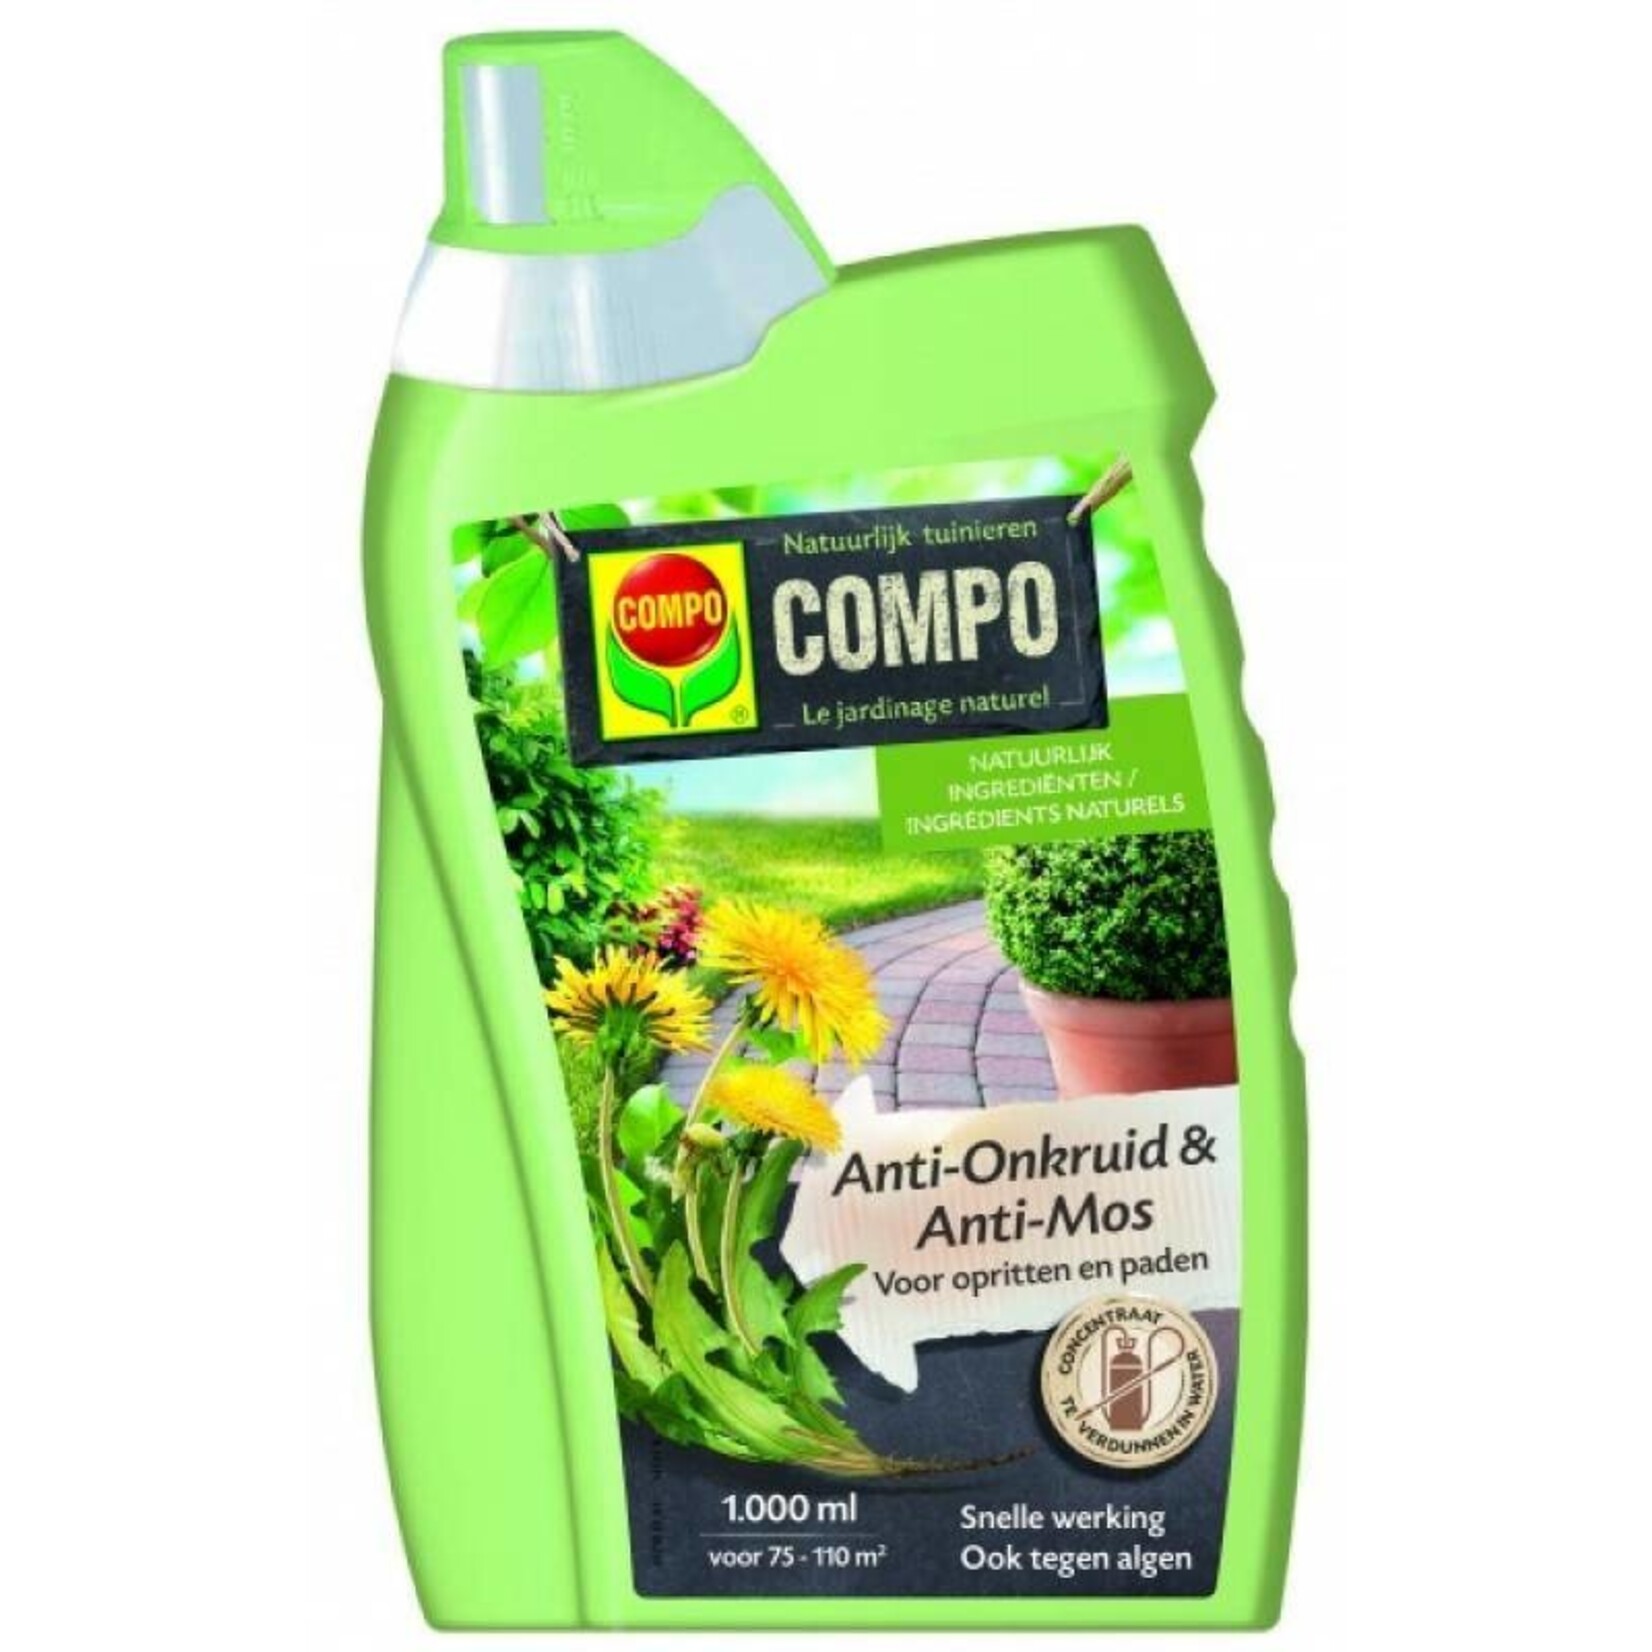 Compo Anti-Onkruid & Anti-Mos Opritten & Paden Concentraat 1L